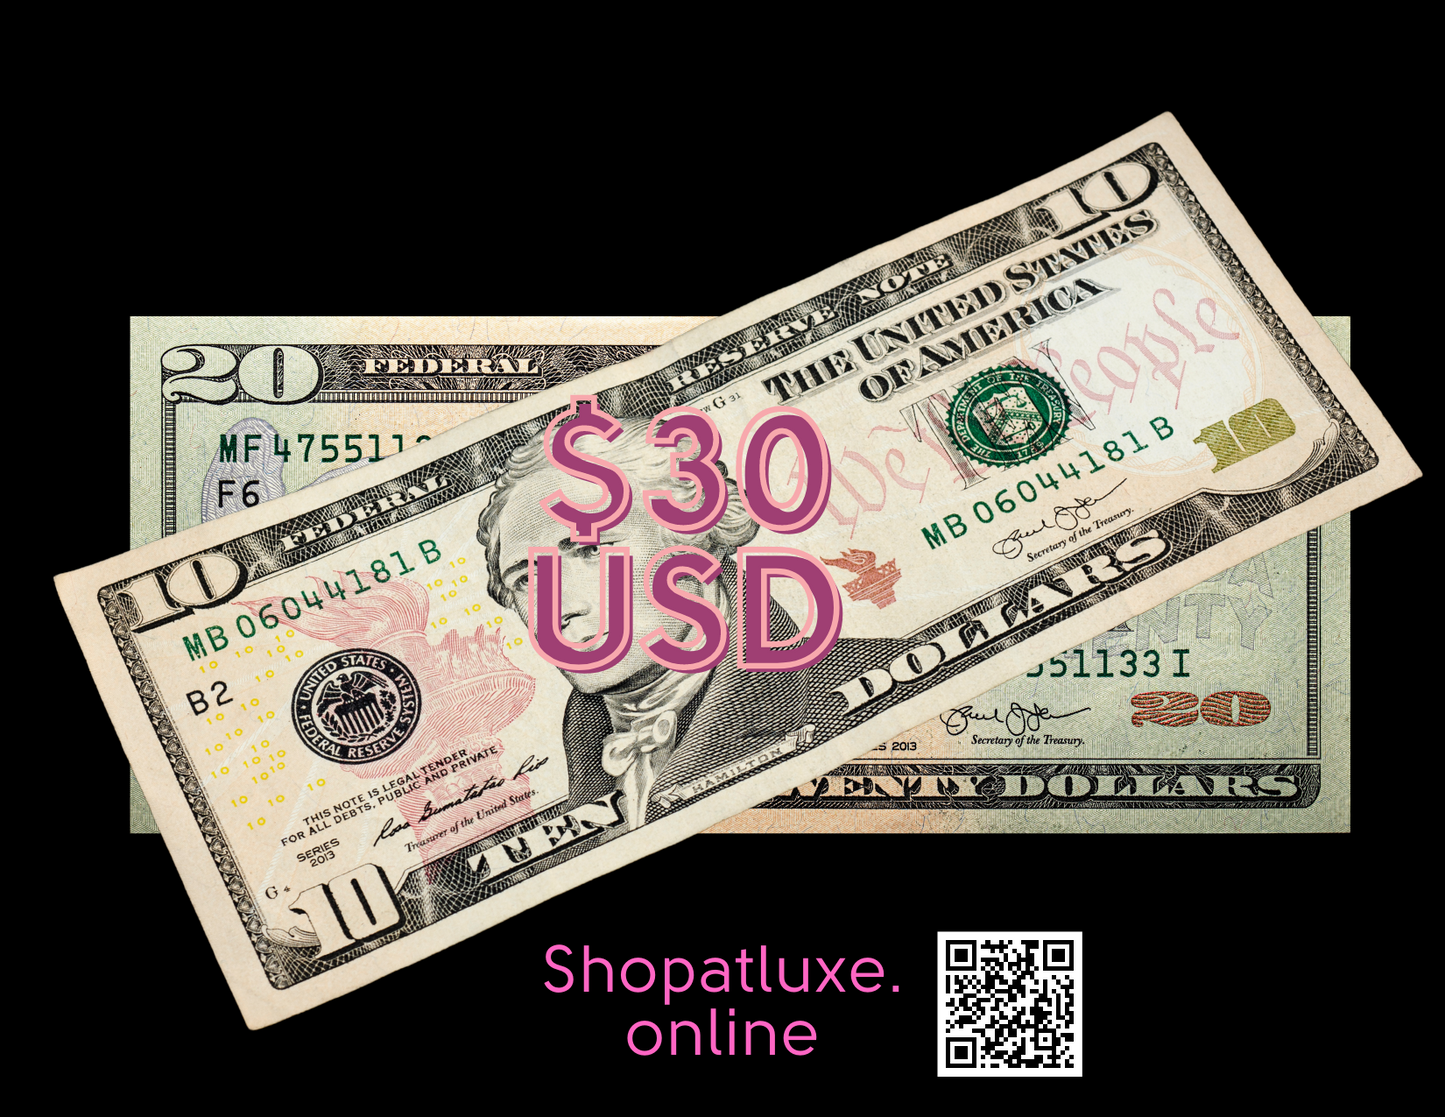 IT'S YOUR BIRTHDAY GIFT CARD - Shopatluxe.Online